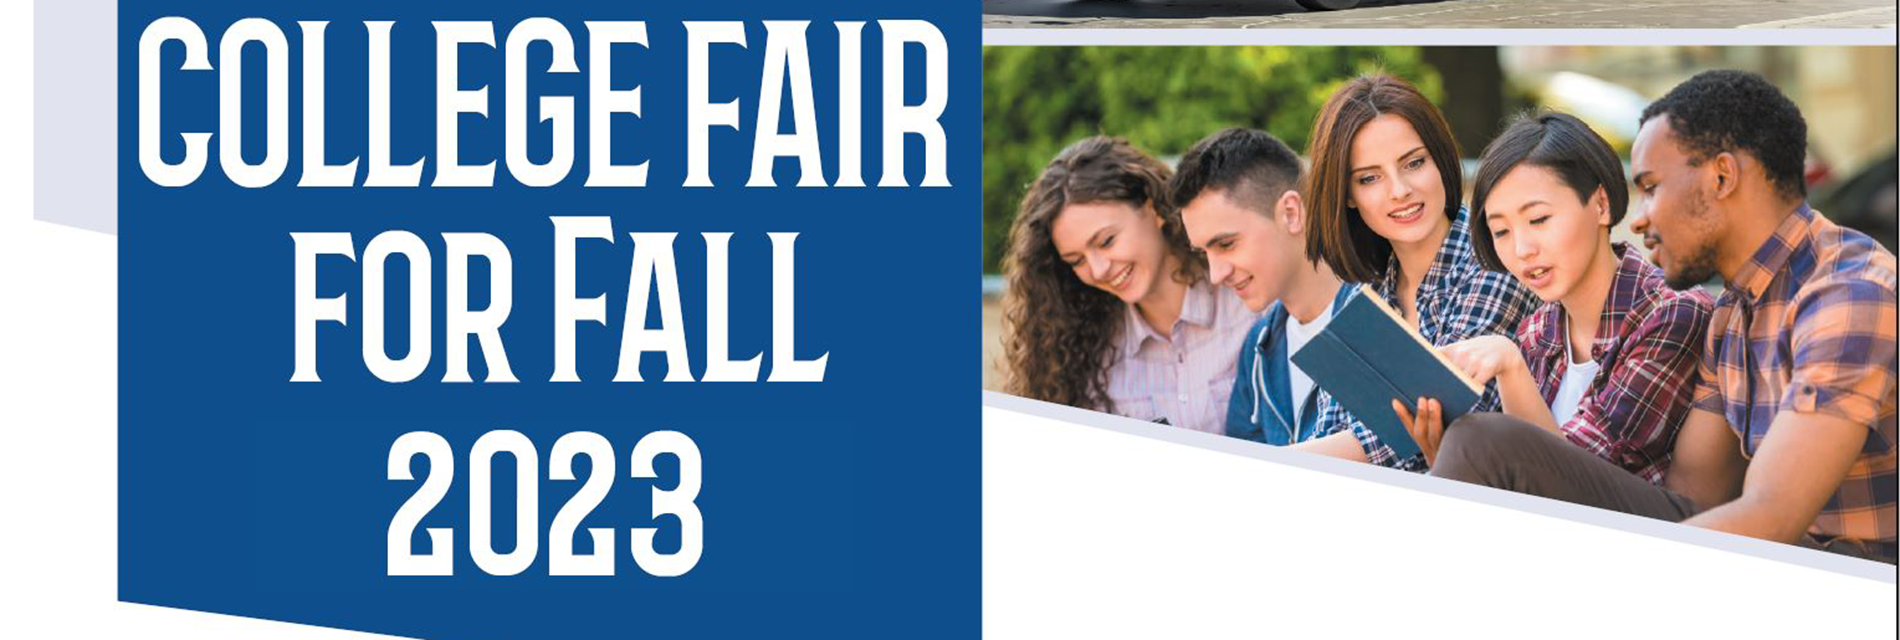 College Fair banner.png